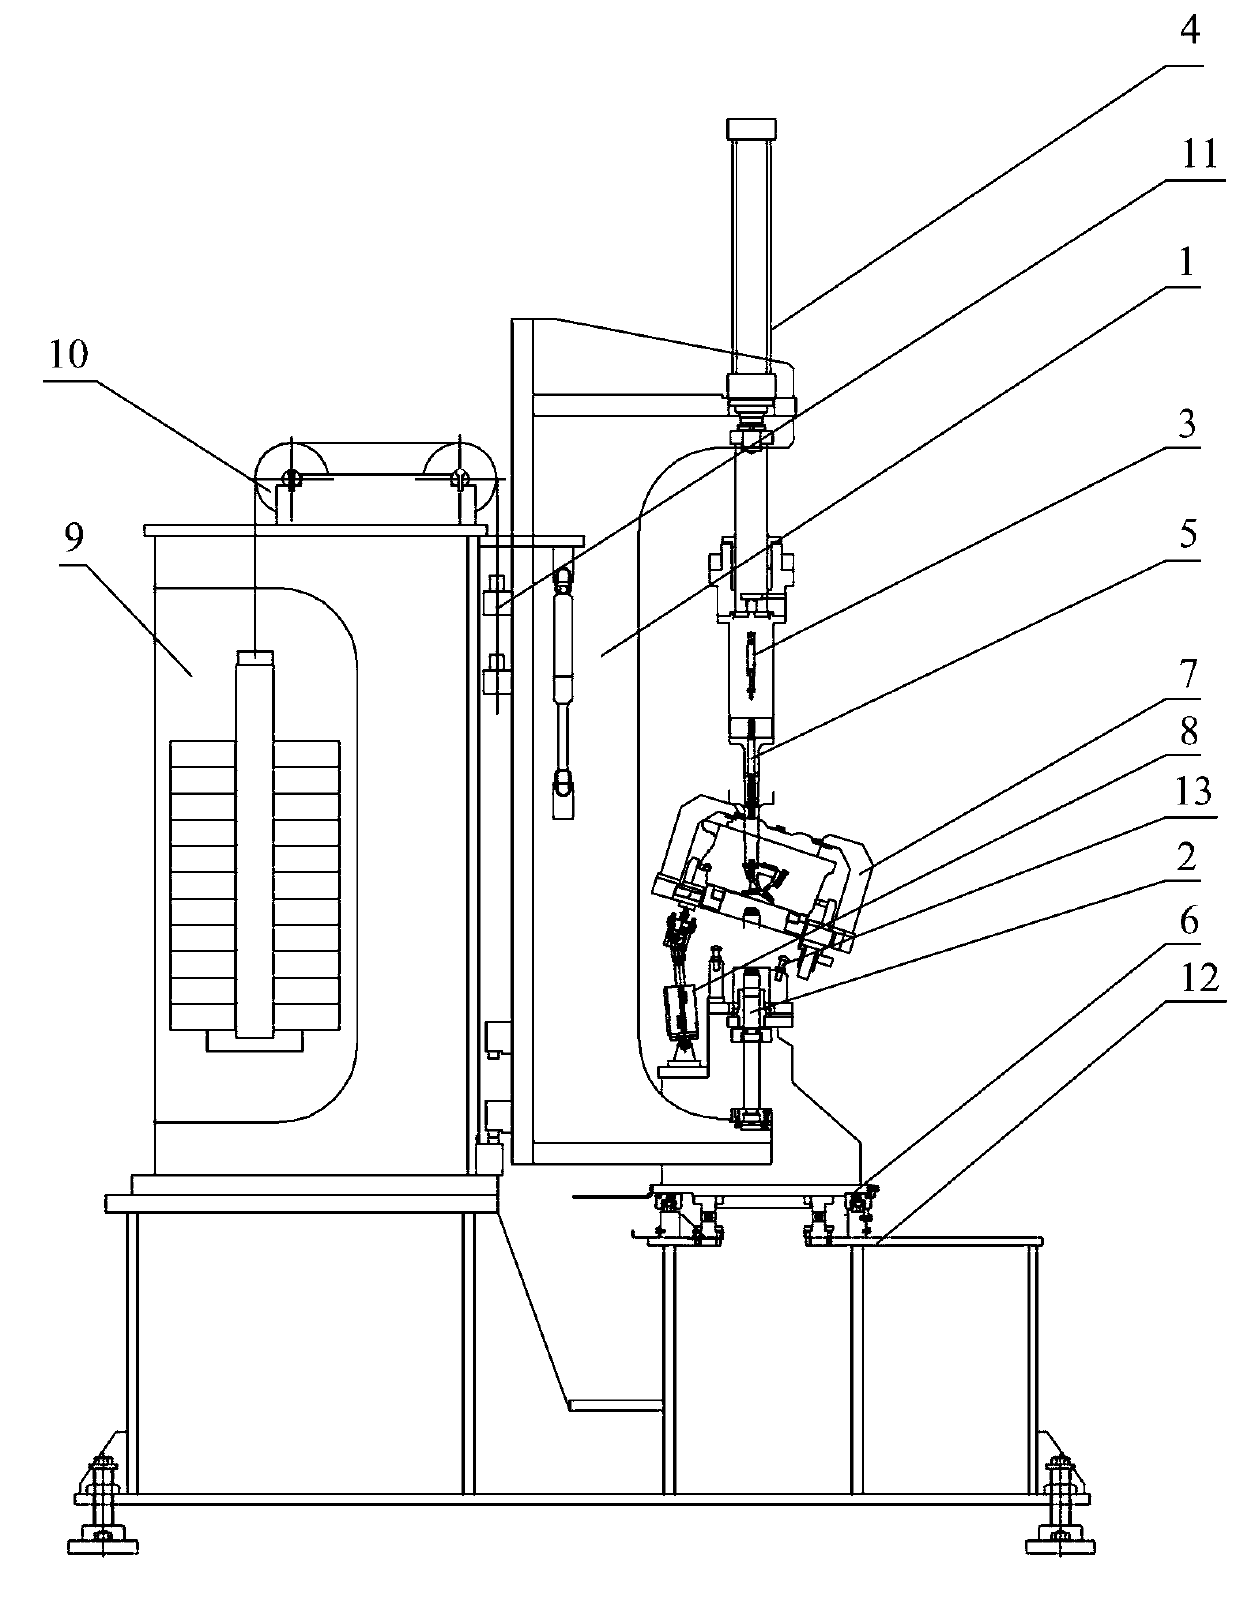 Press fitting device for guide pipe and seat retainer of engine cylinder head